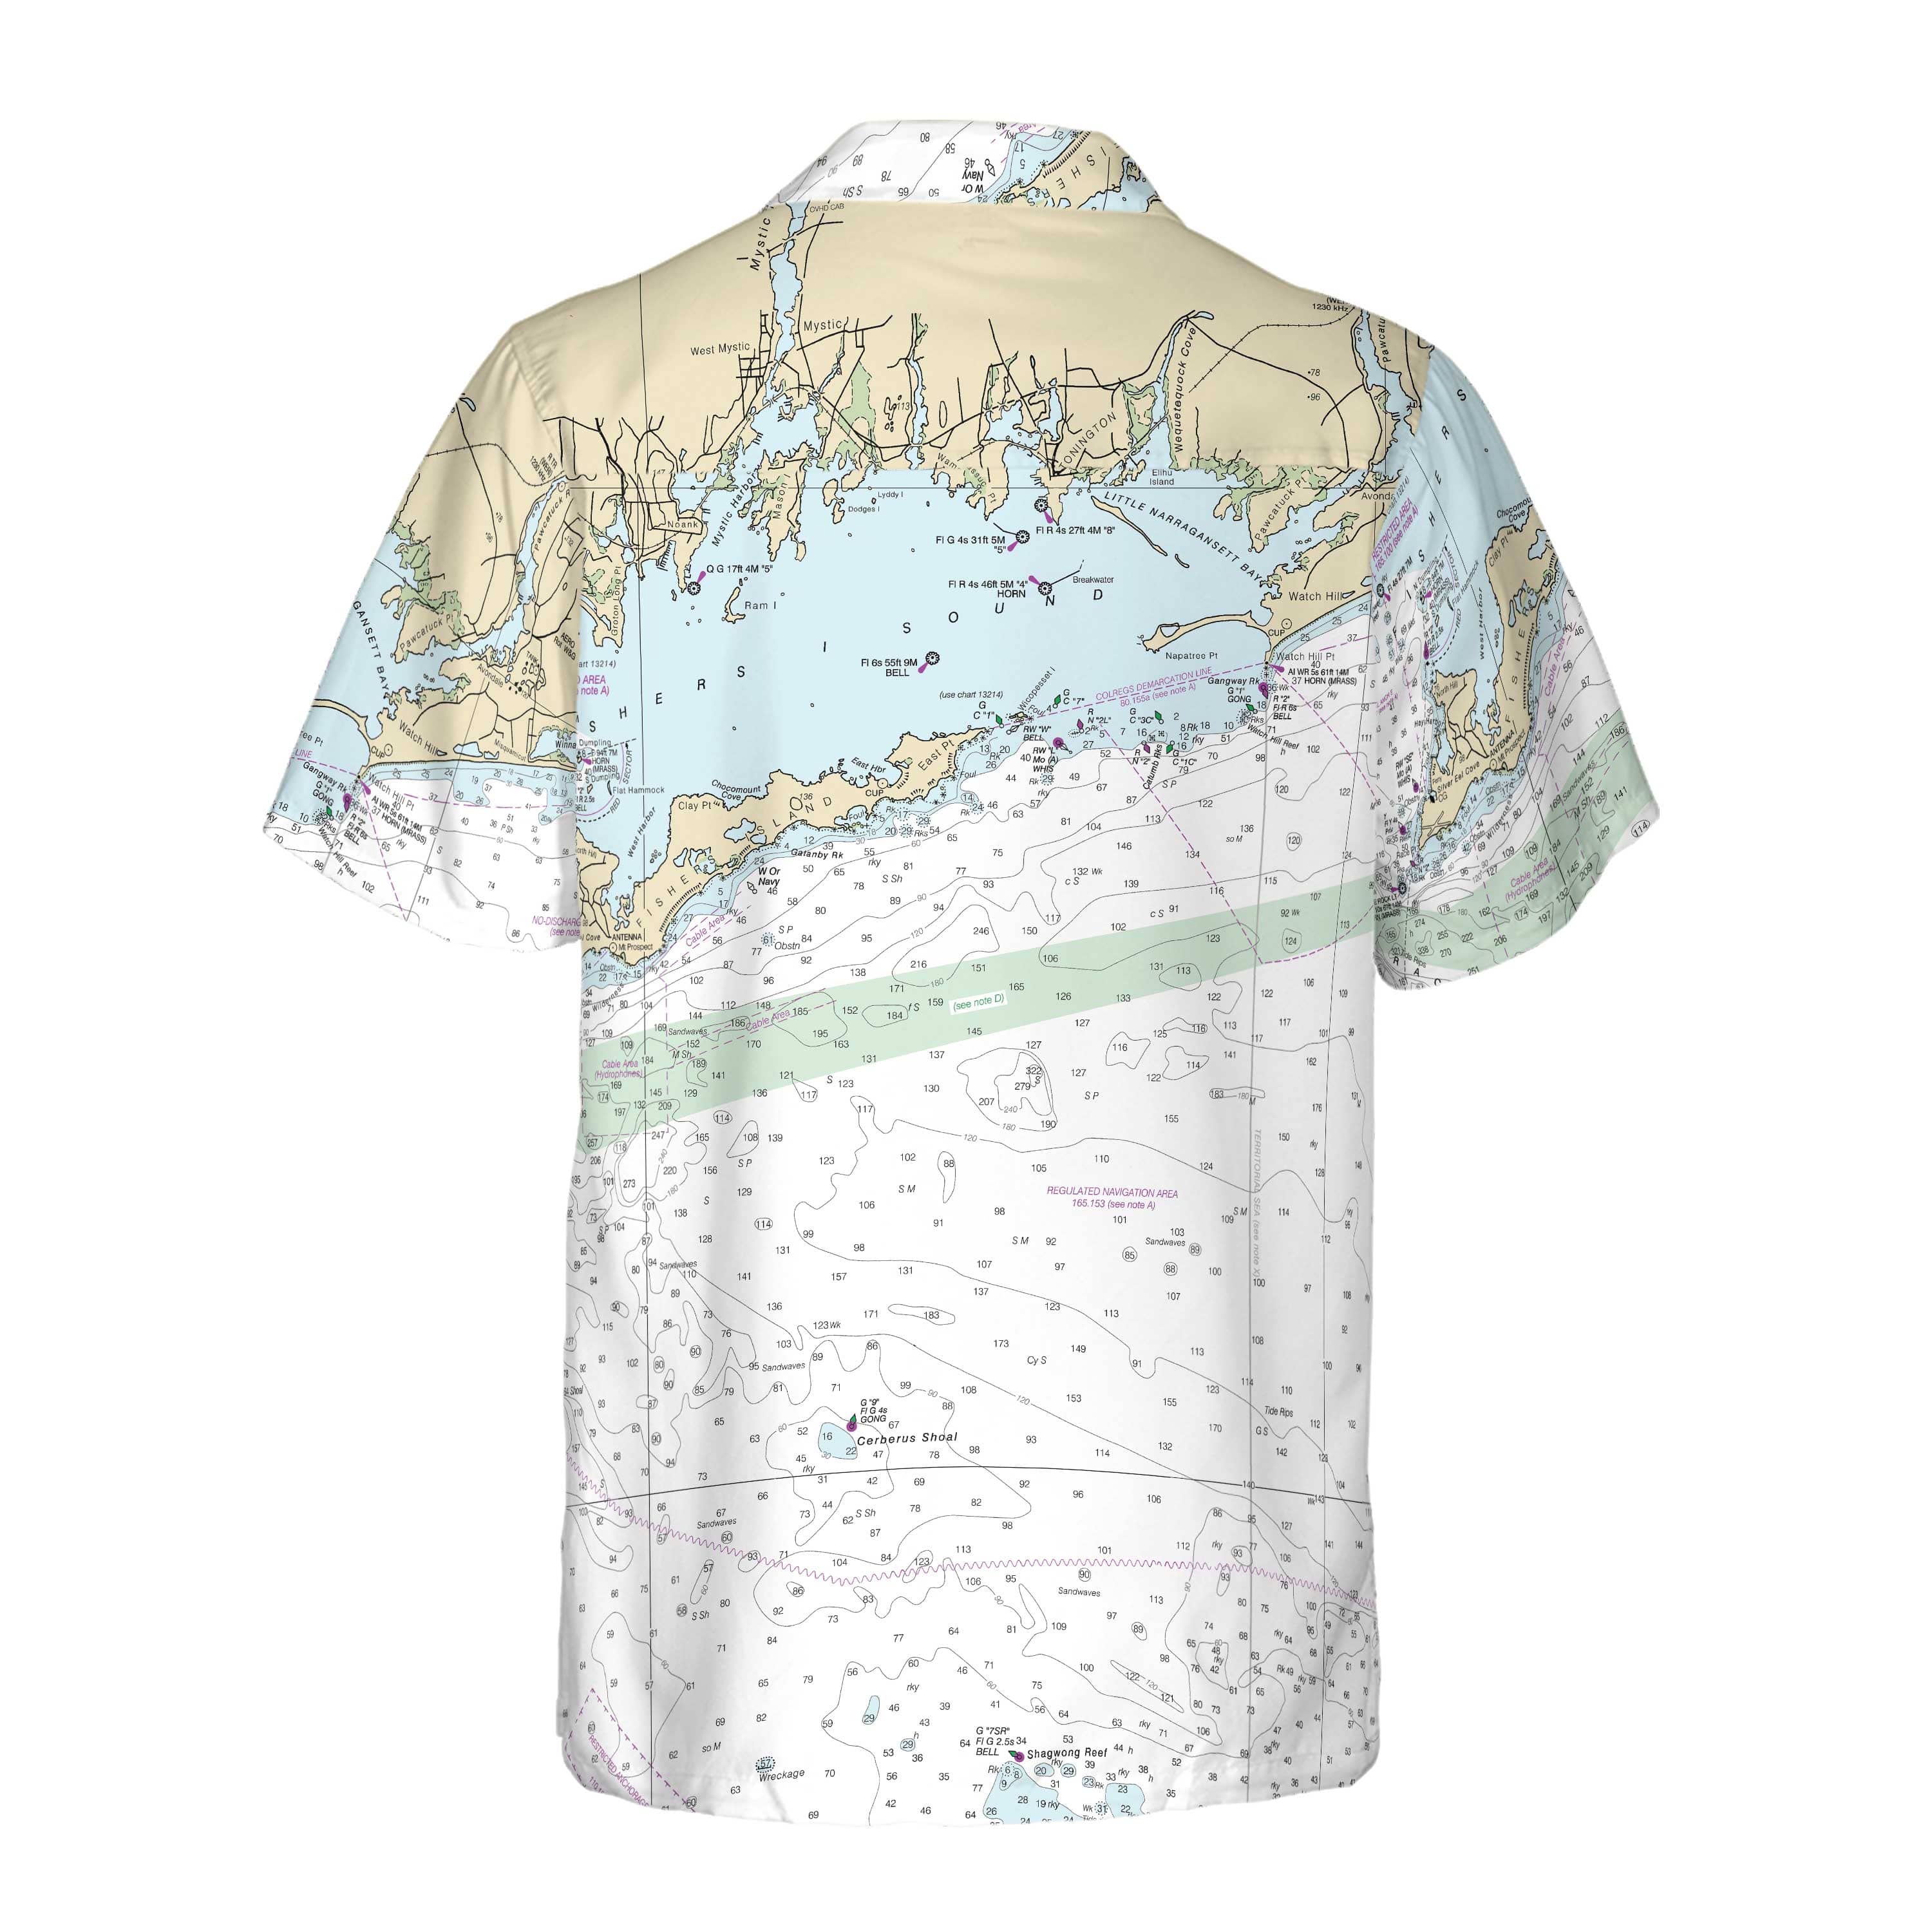 The Fishers Island Sound Coconut Button Camp Shirt